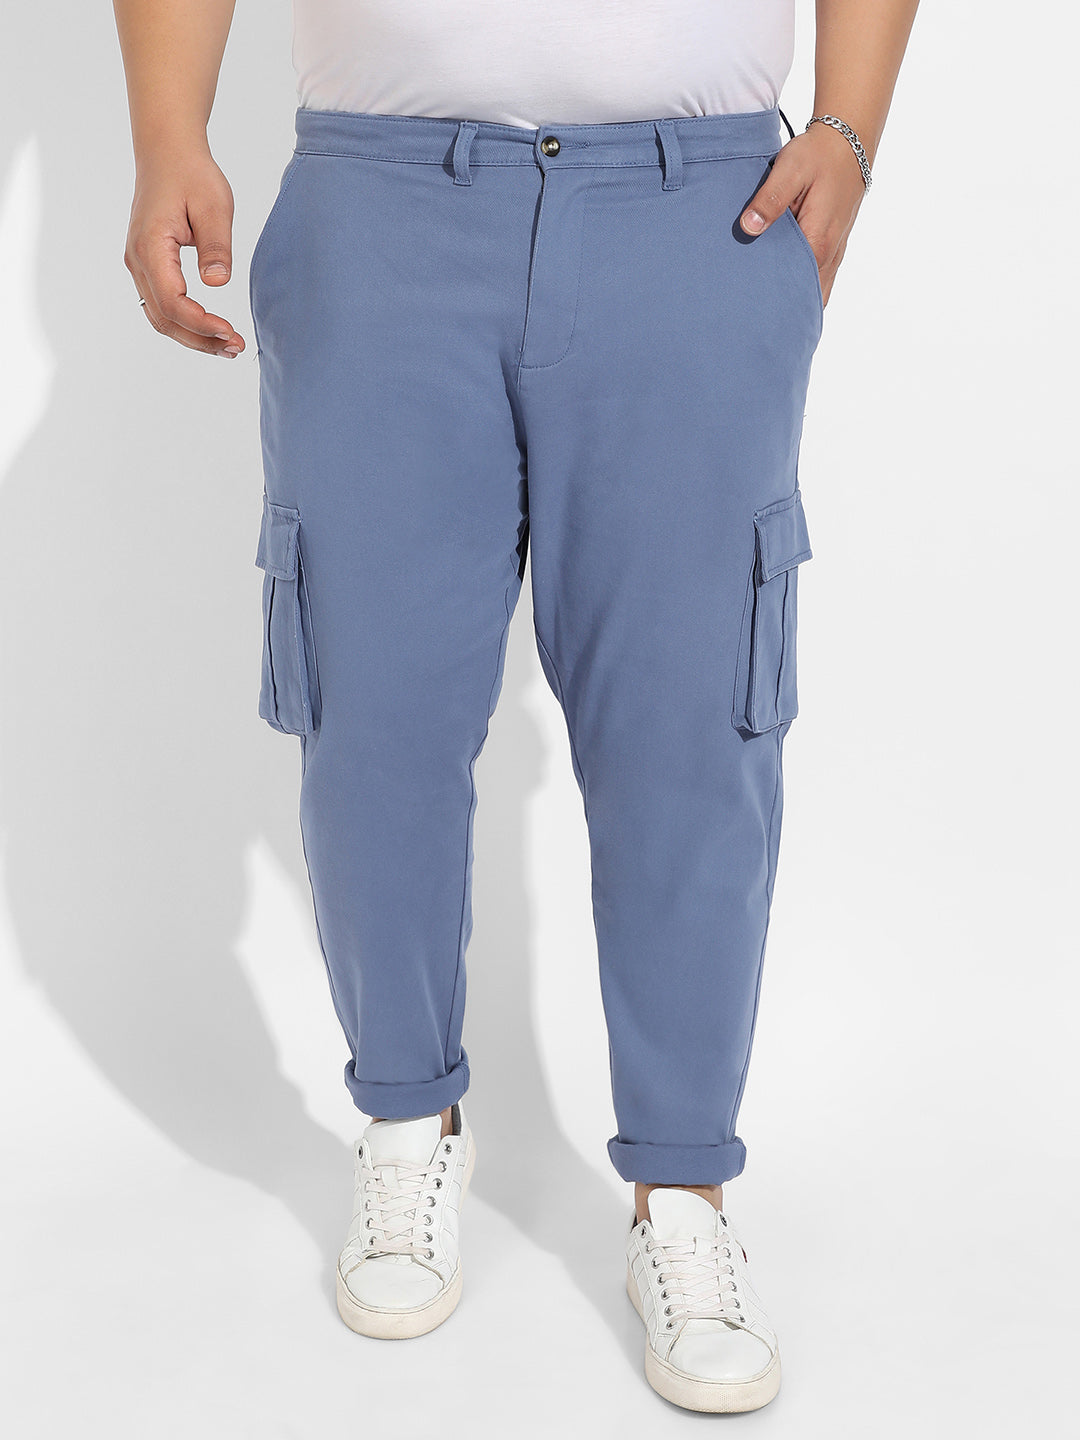 Blue Cargo Trousers